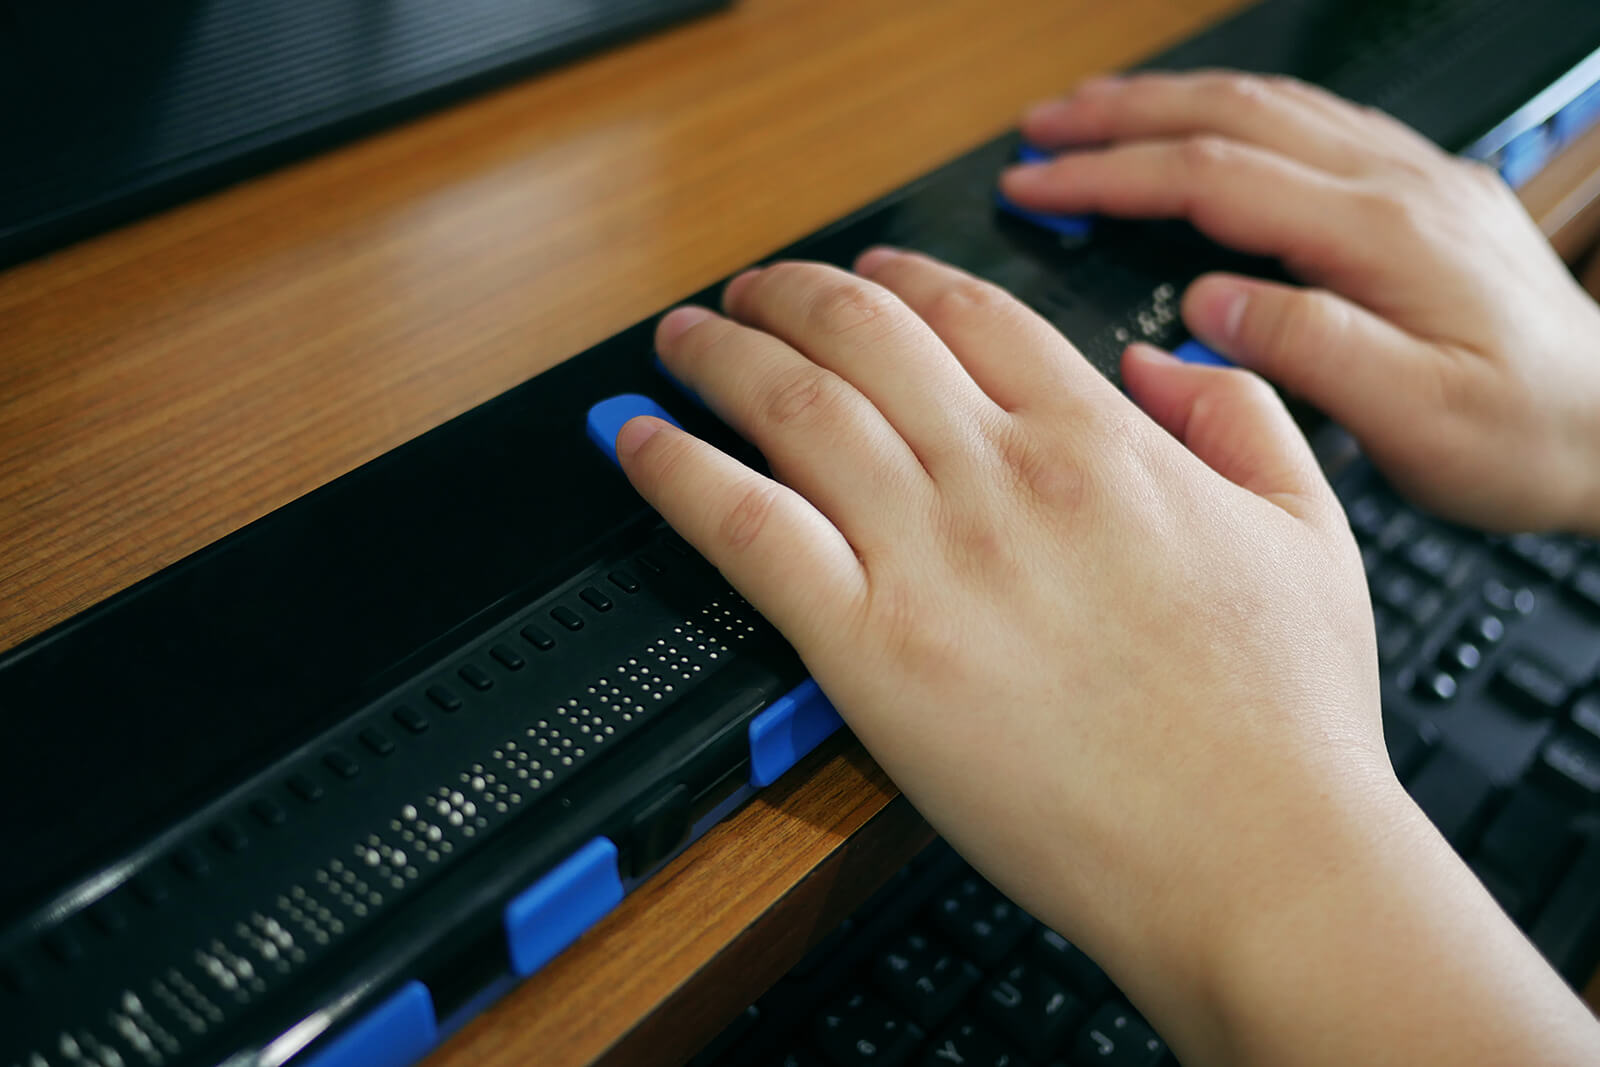 Close-up image of a persons hands using computer with braille display